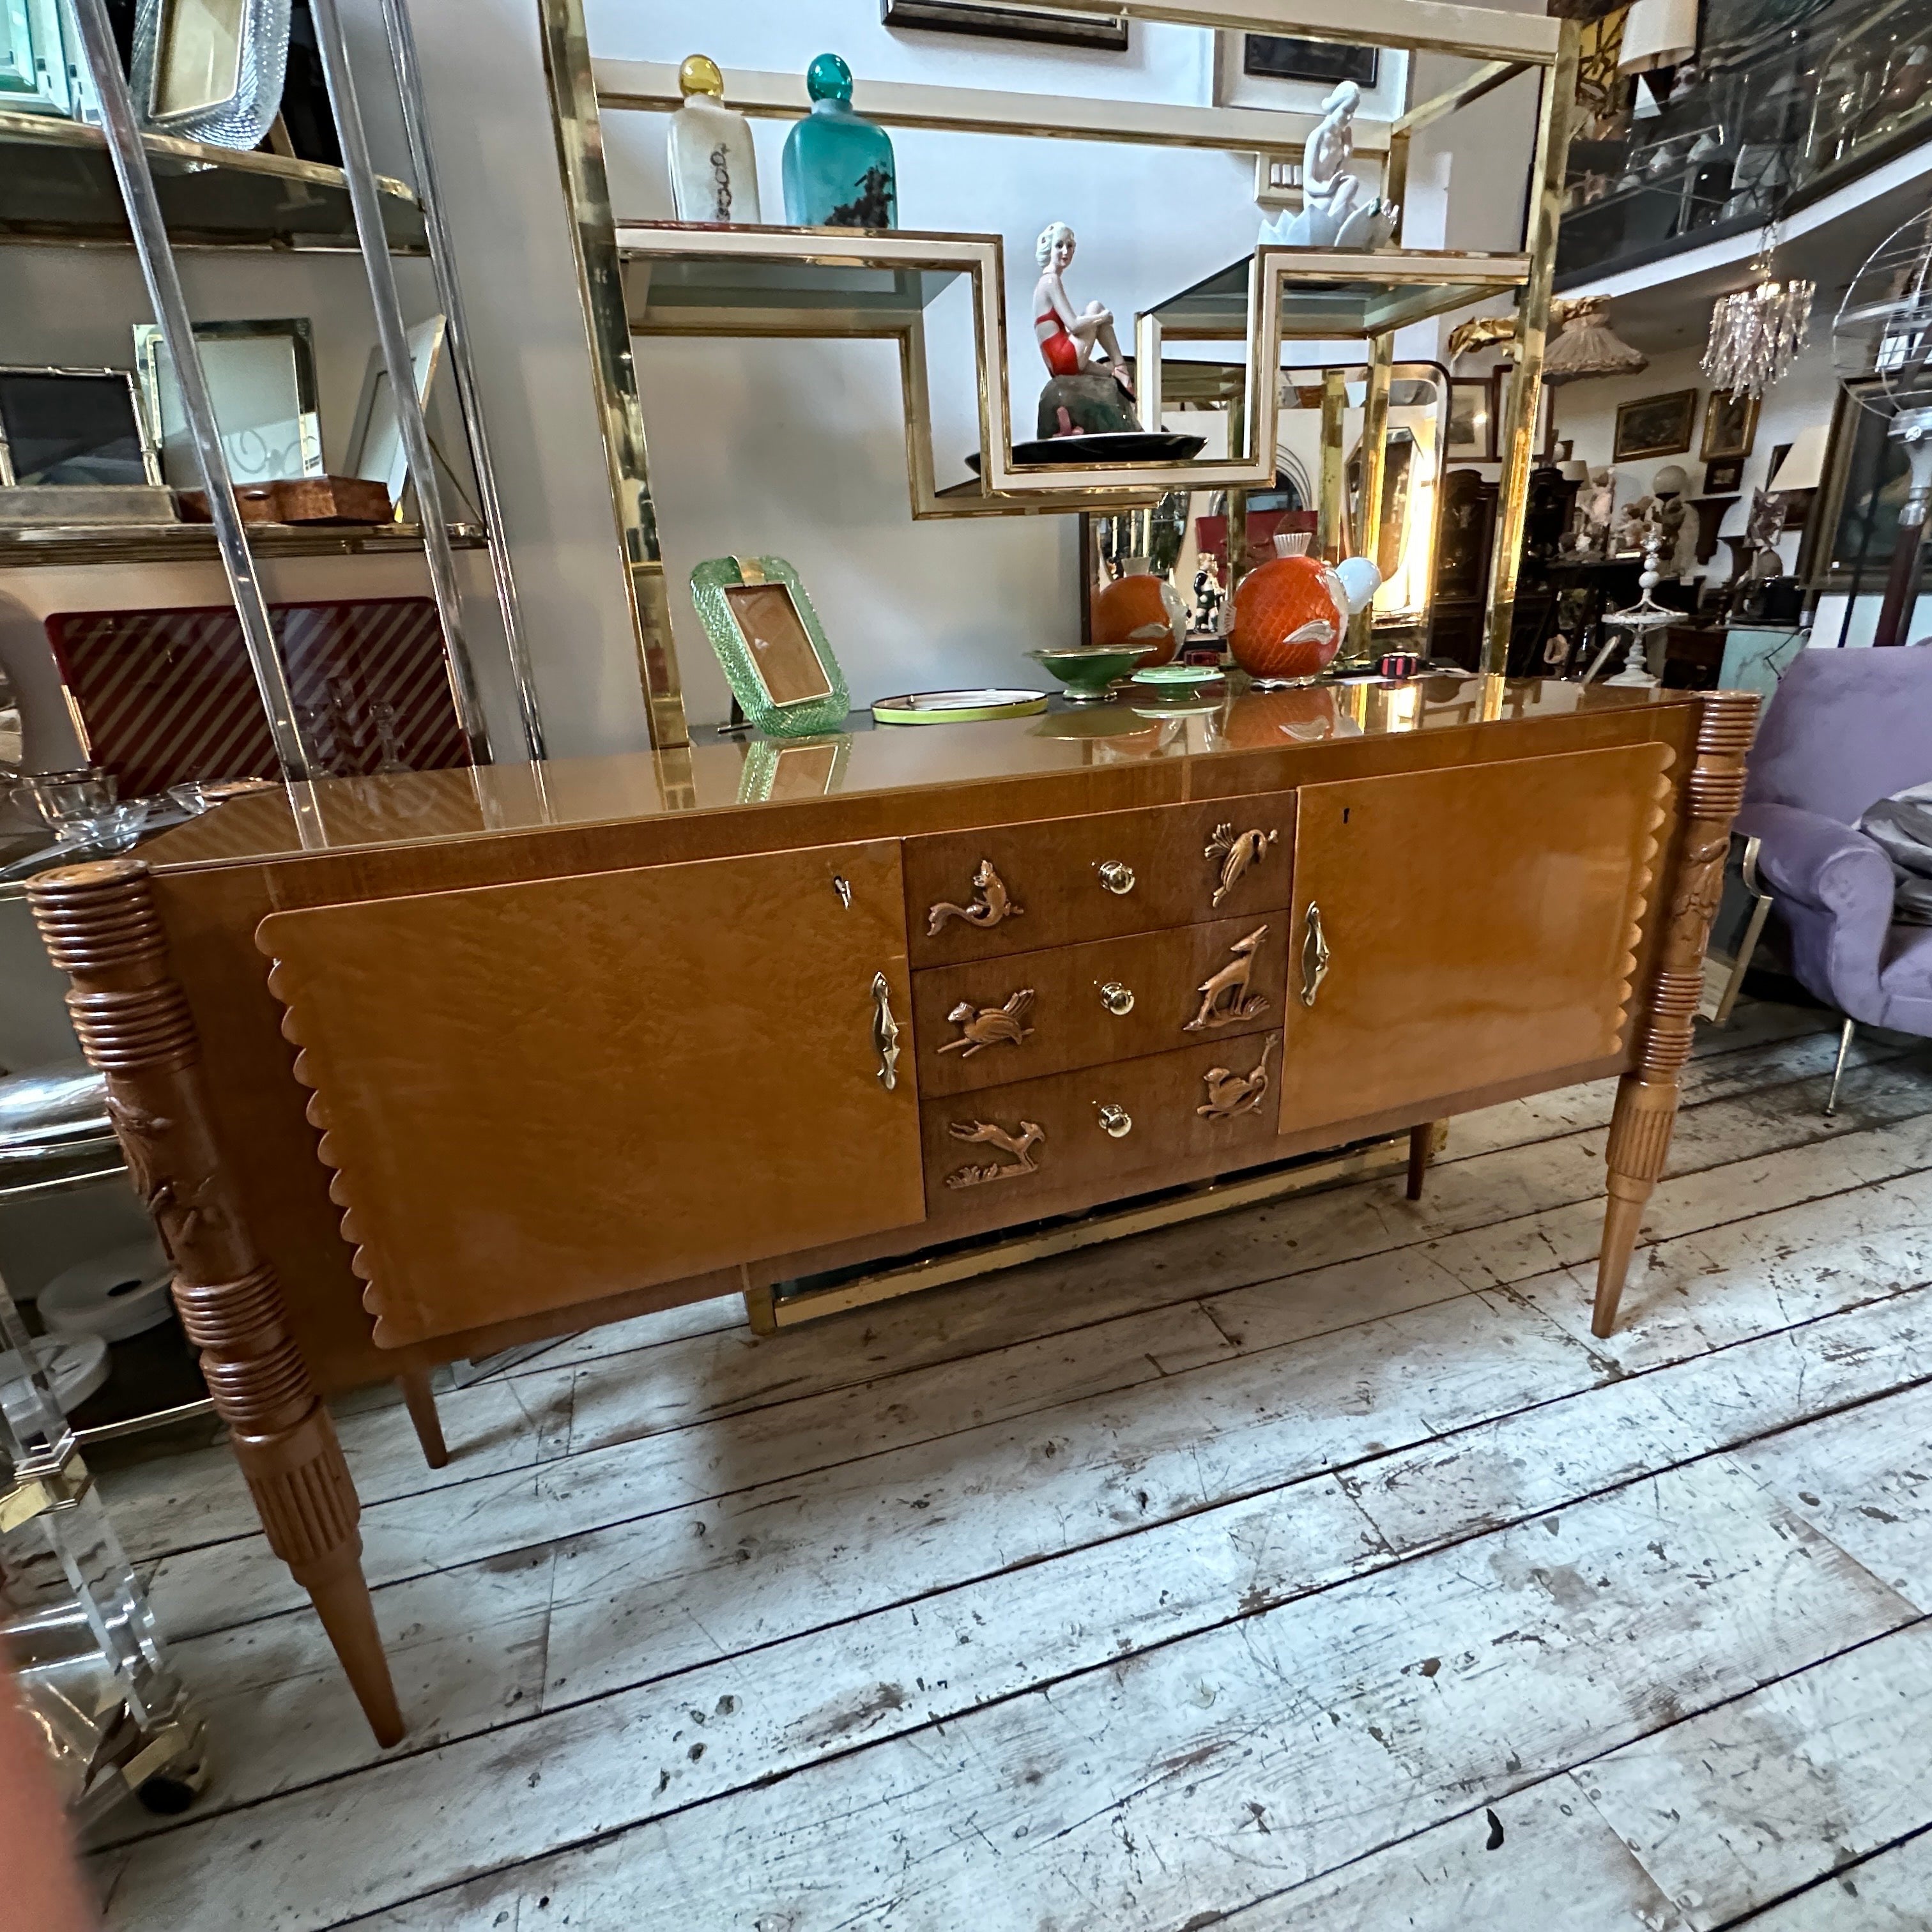 An italian sideboard with a burled birch veneer designed by Pier Luigi Colli and manufactured by F.lli Marelli Cantu.  Two exterior cabinet doors with brass door handles, centering three drawers with carved bird decorations on the fronts with brass